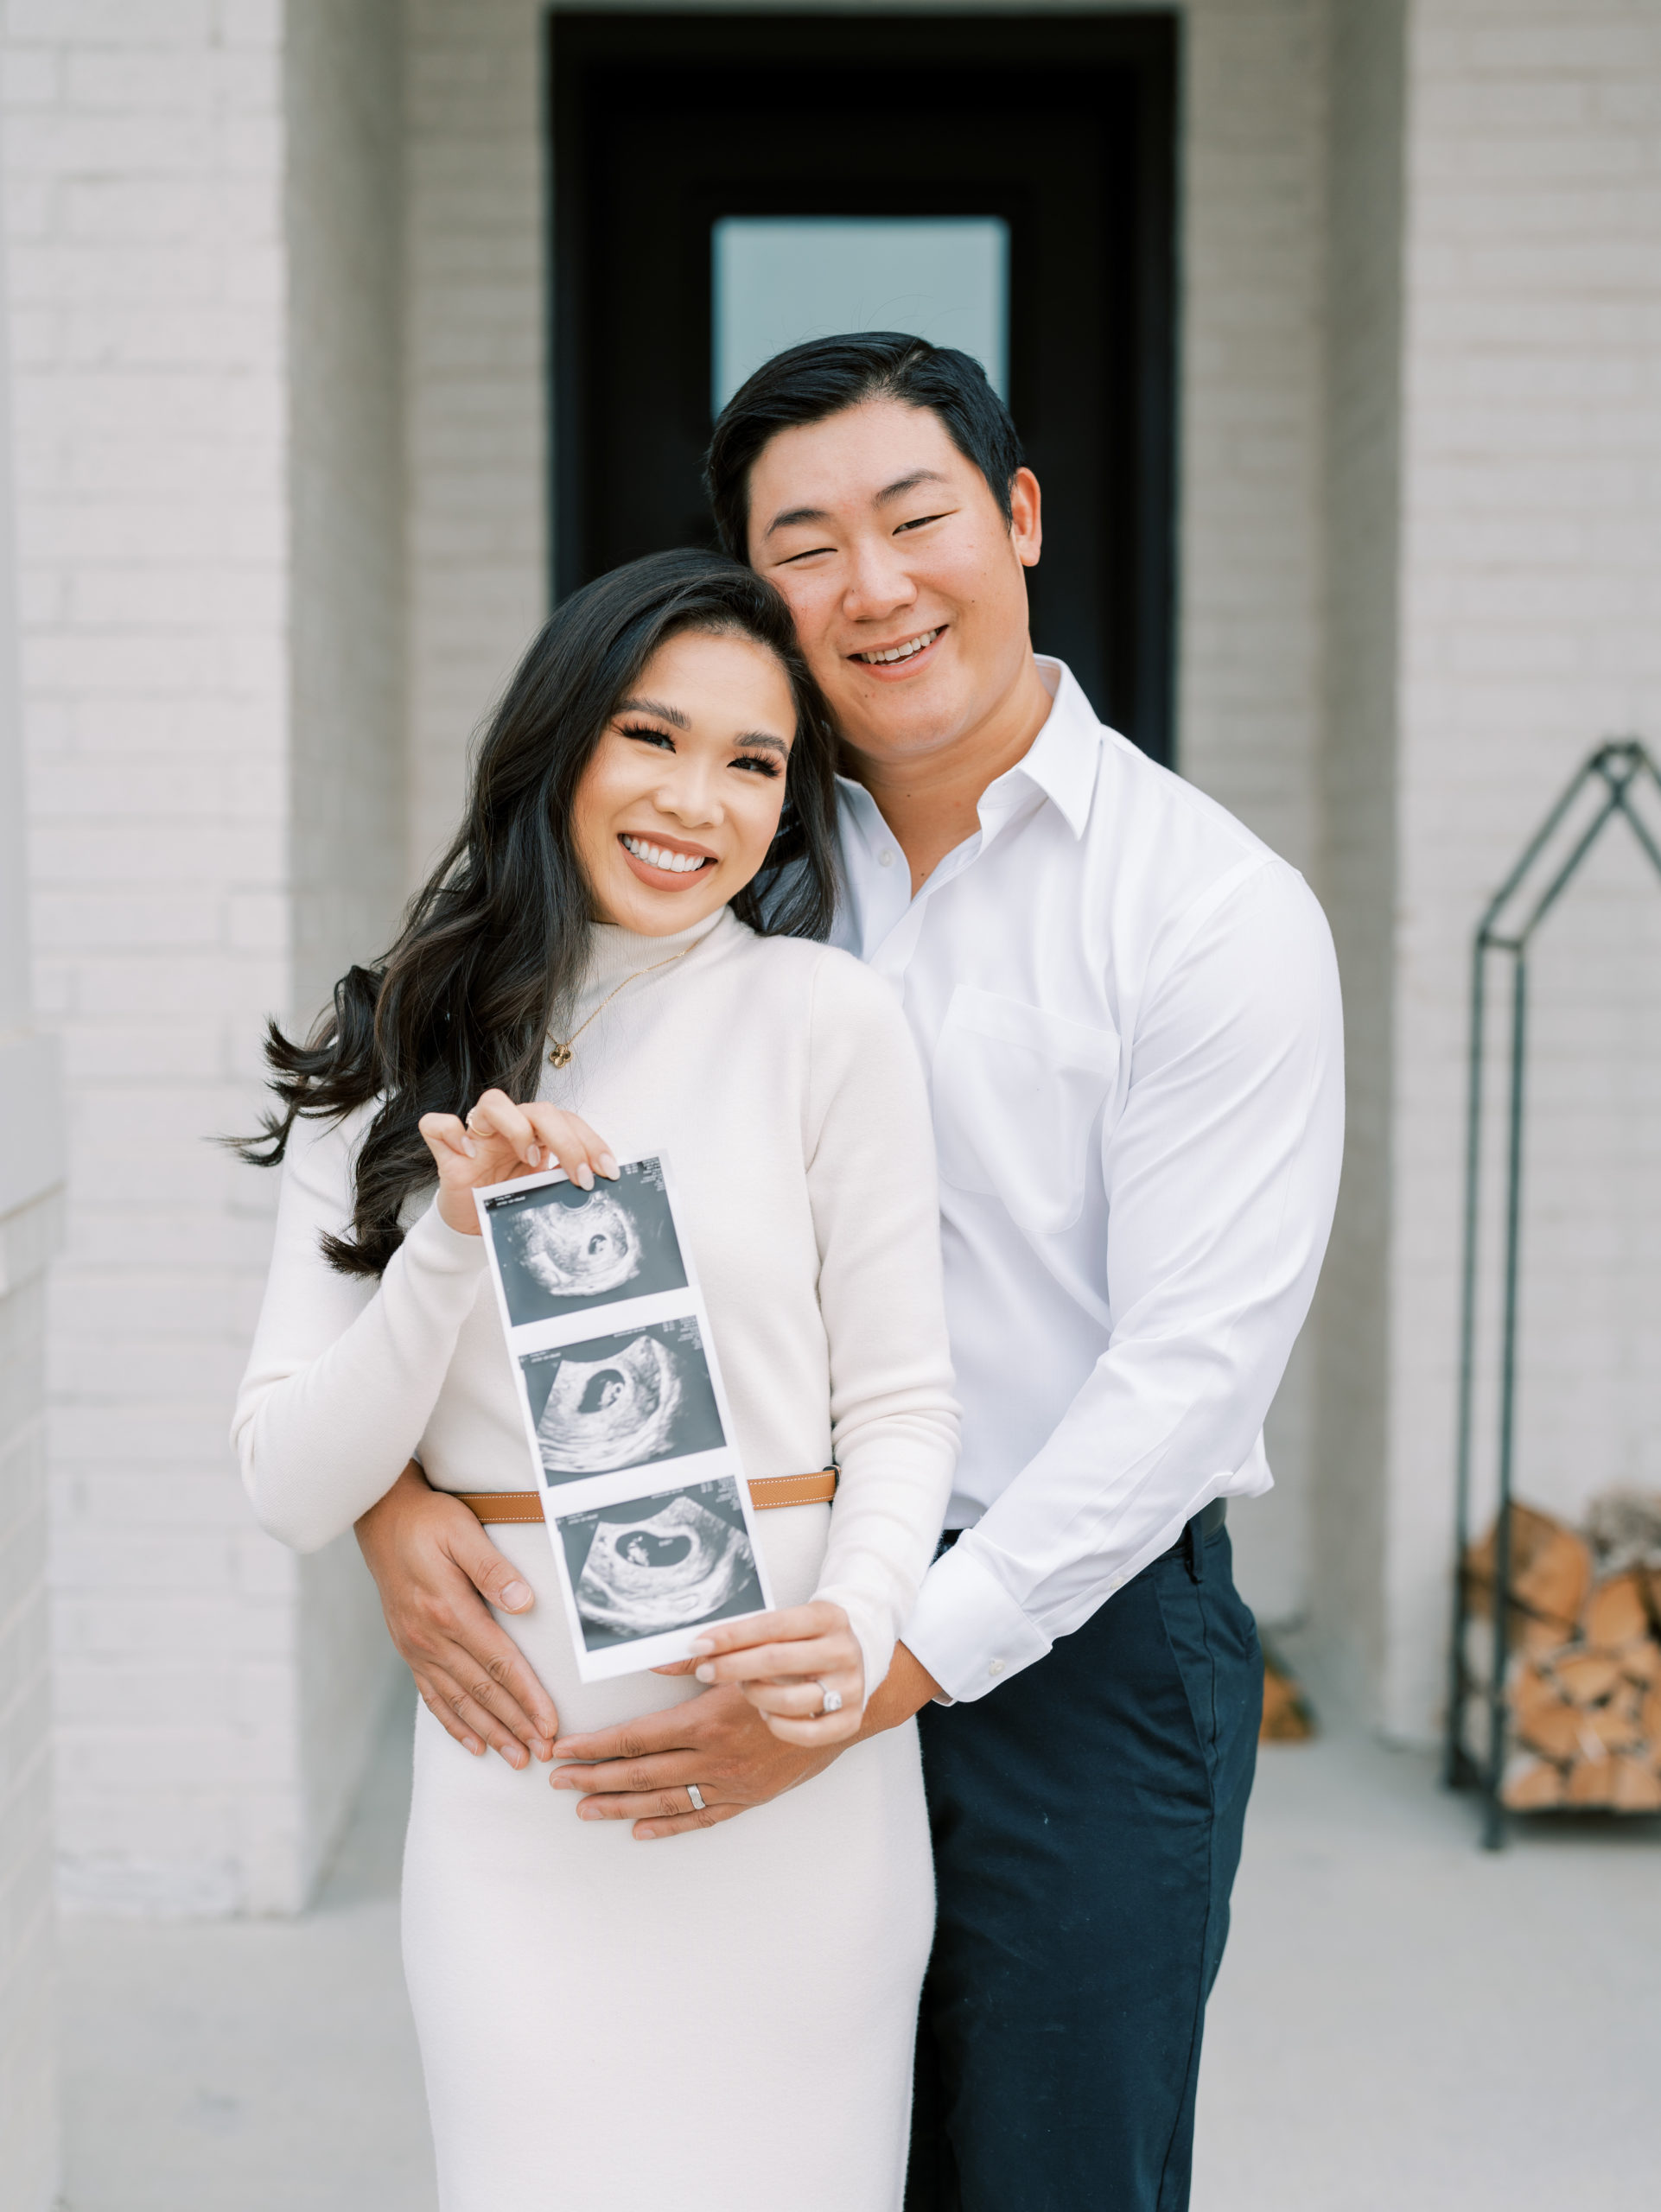 We're Having A Baby! Our Pregnancy Announcement - Color & Chic